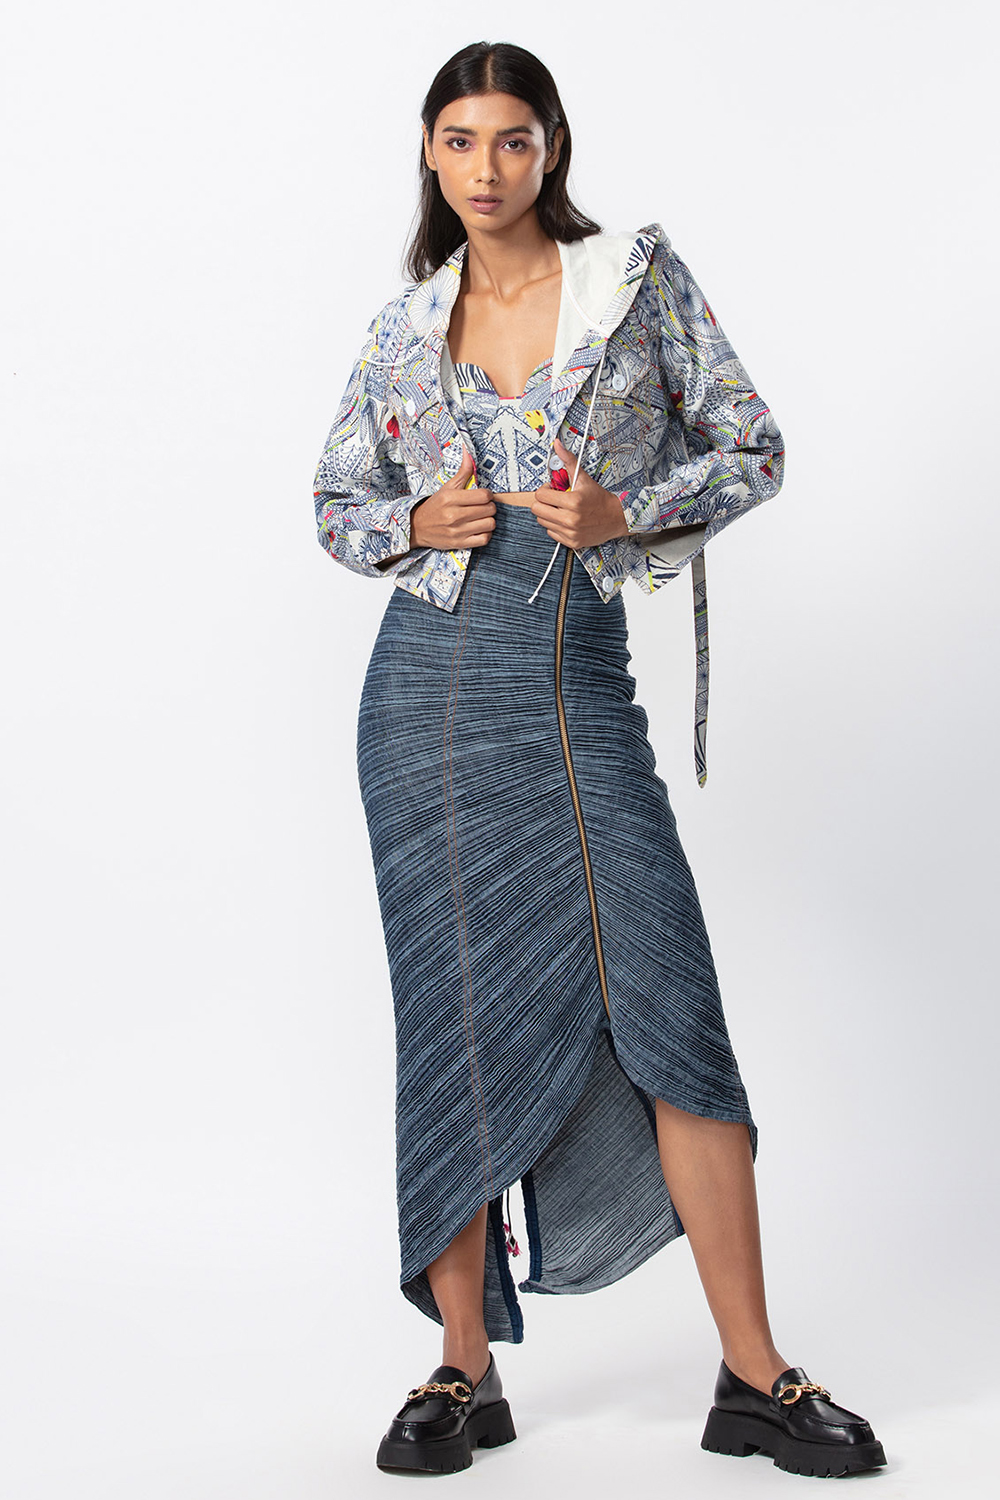 Abstract Print Denim Hooded Bomber Style Cropped Jacket